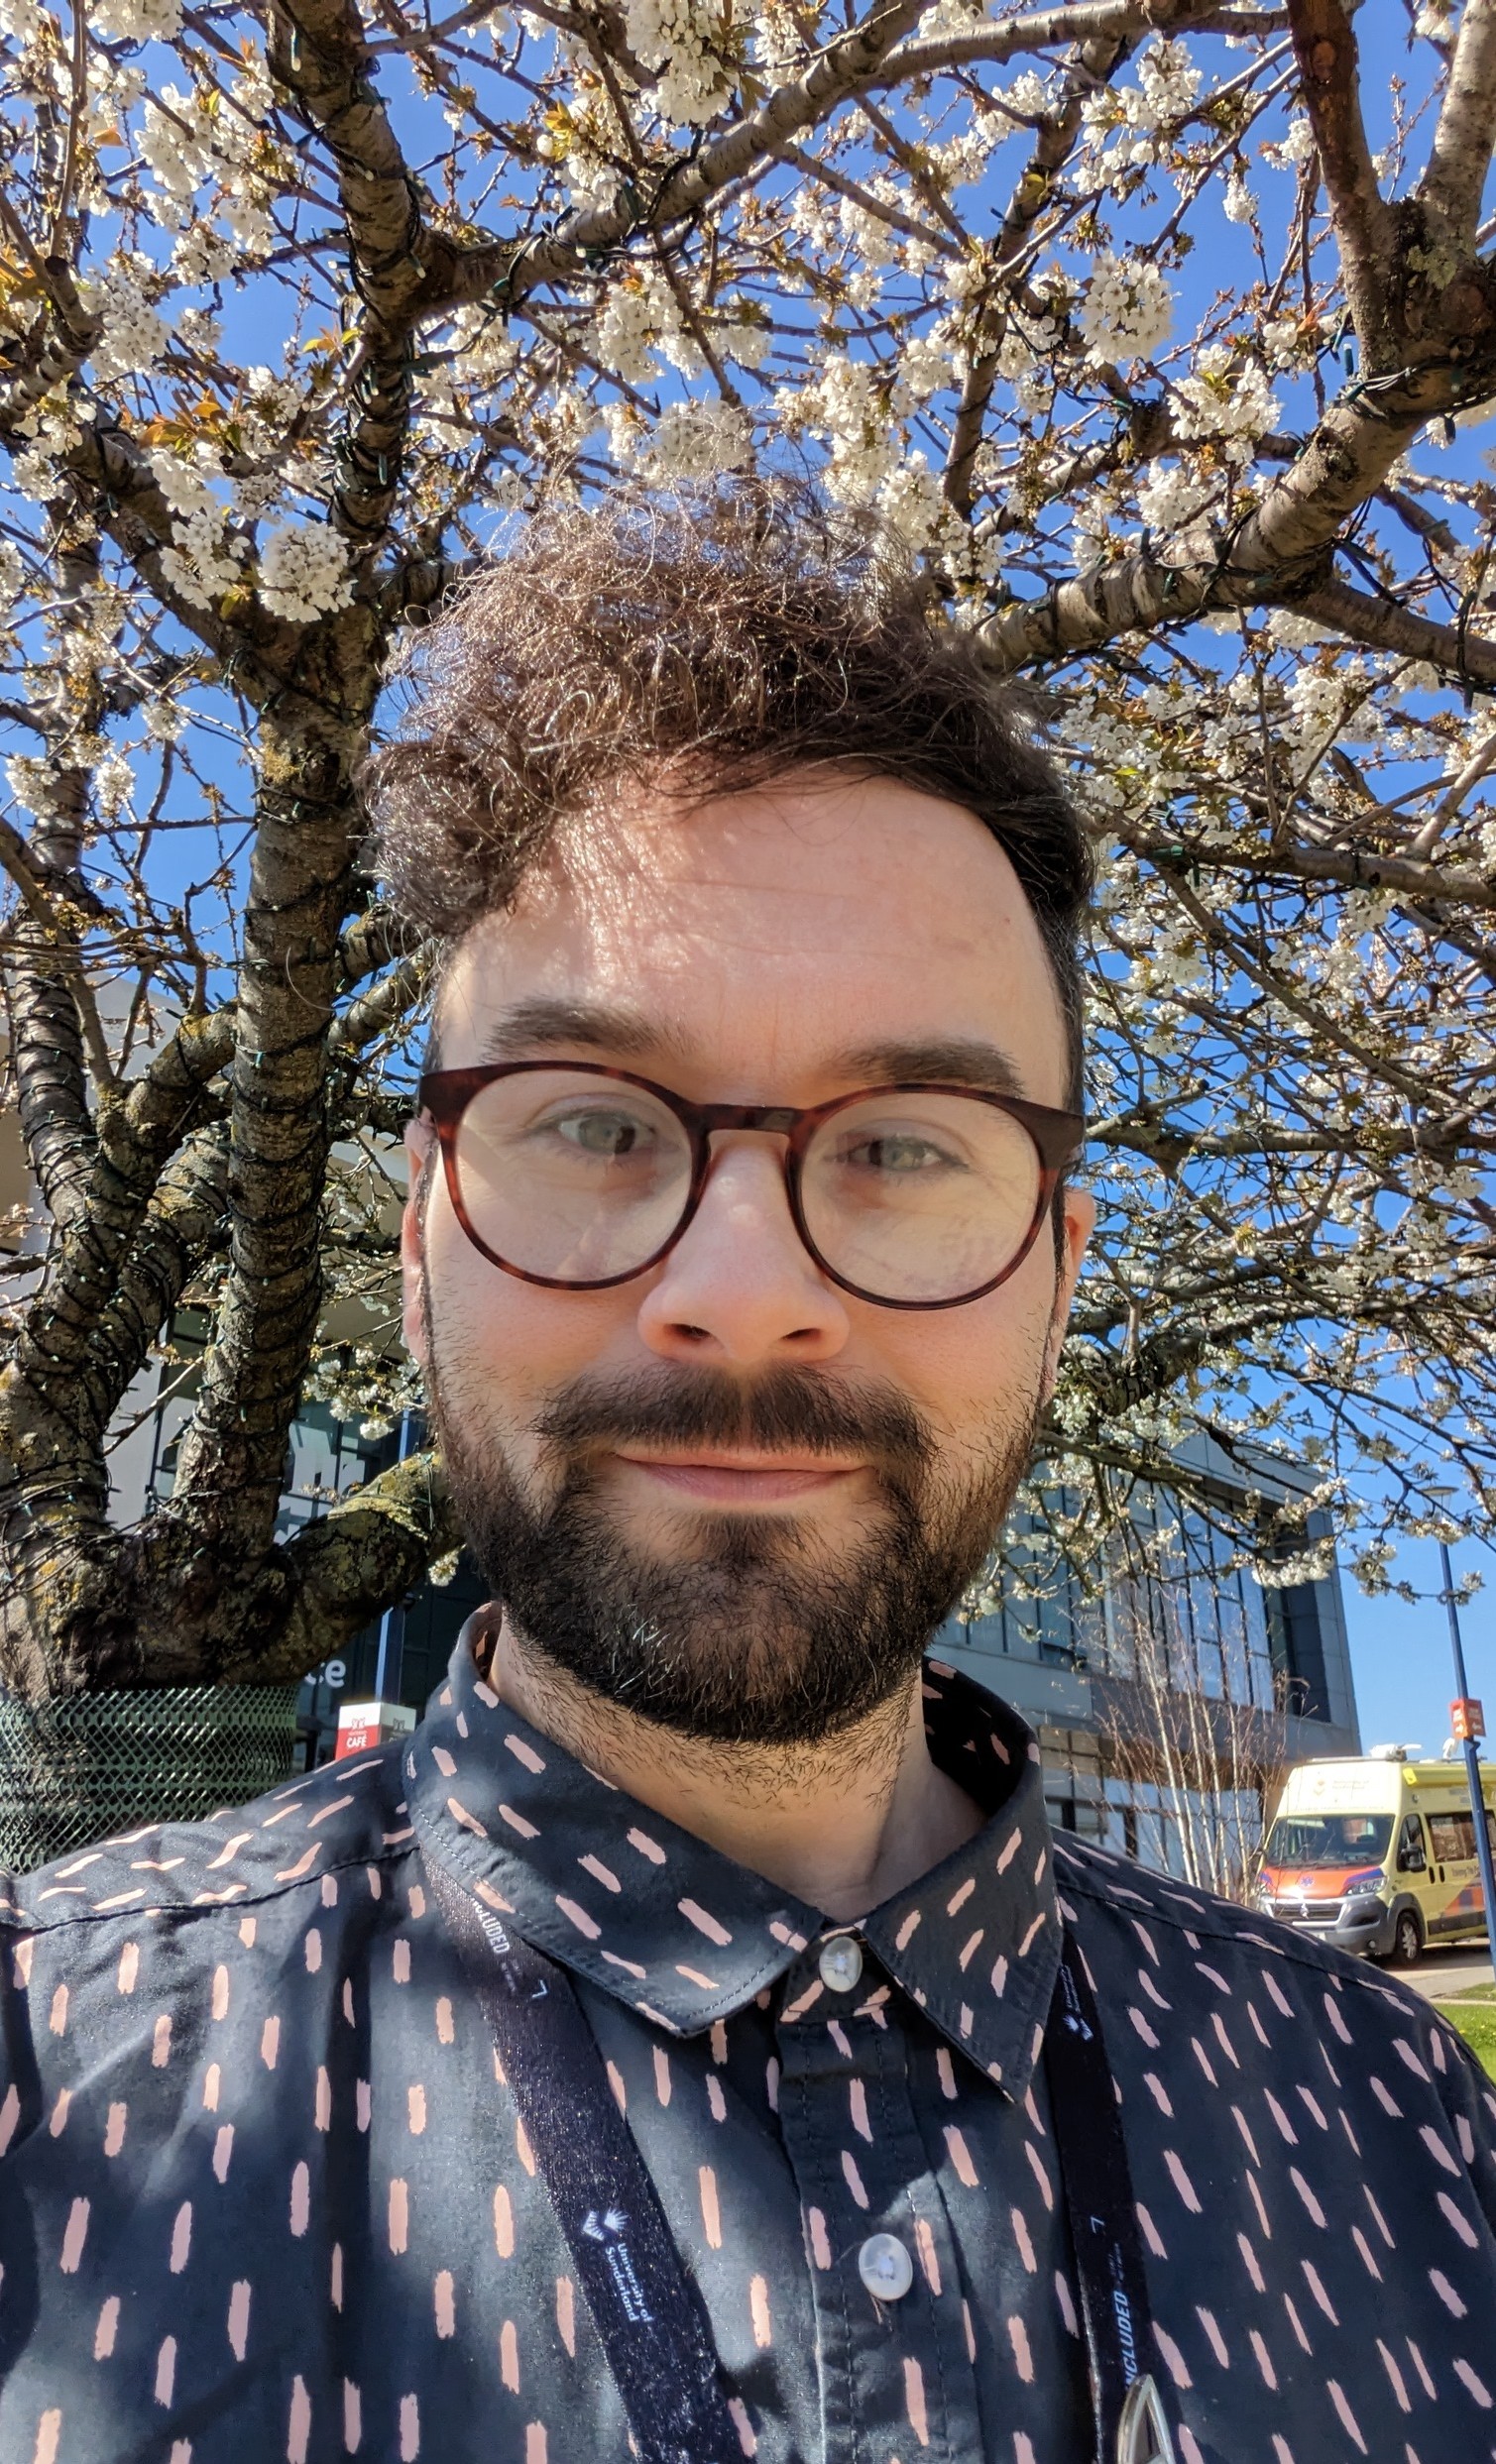 Andrew is light skinned with brown hair and a brown beard. Andrew is wearing glasses and a Navy and pink shirt. In the background are blue skies and a blossom tree